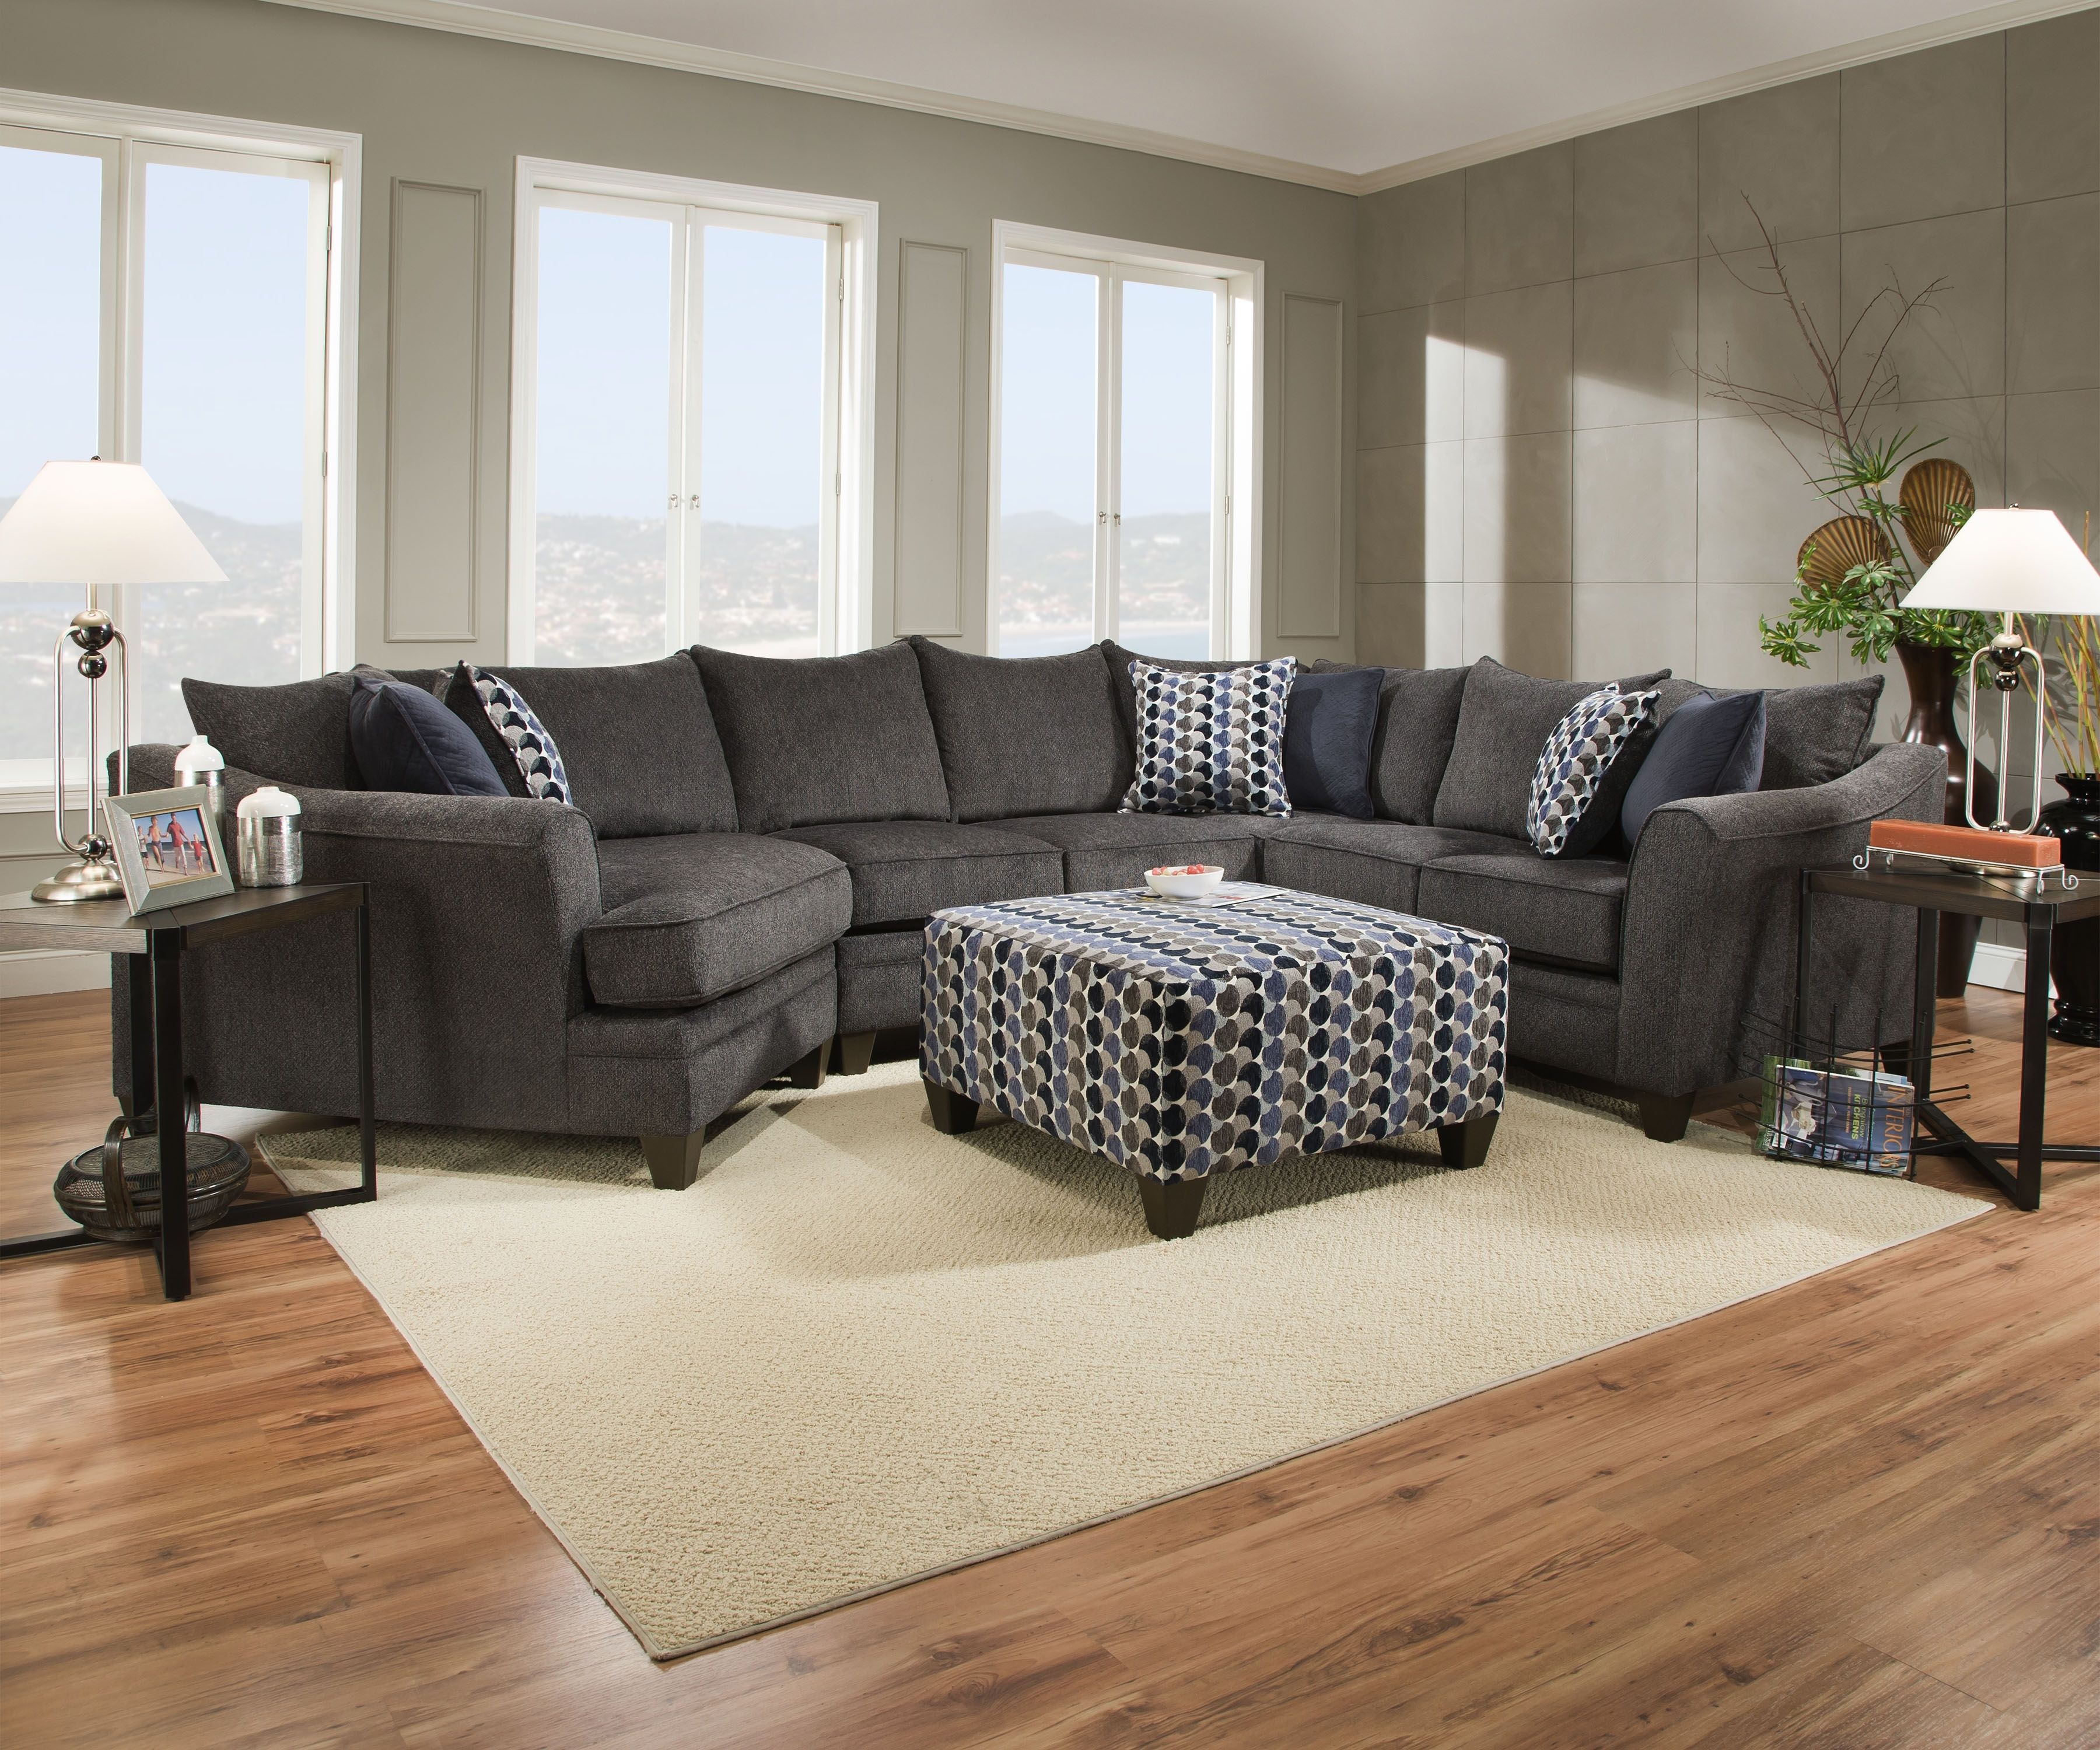 Reagan 3pc Sectional – Albany Pewter | Nader's Furniture Throughout Sectional Sofas At Sears (View 2 of 10)